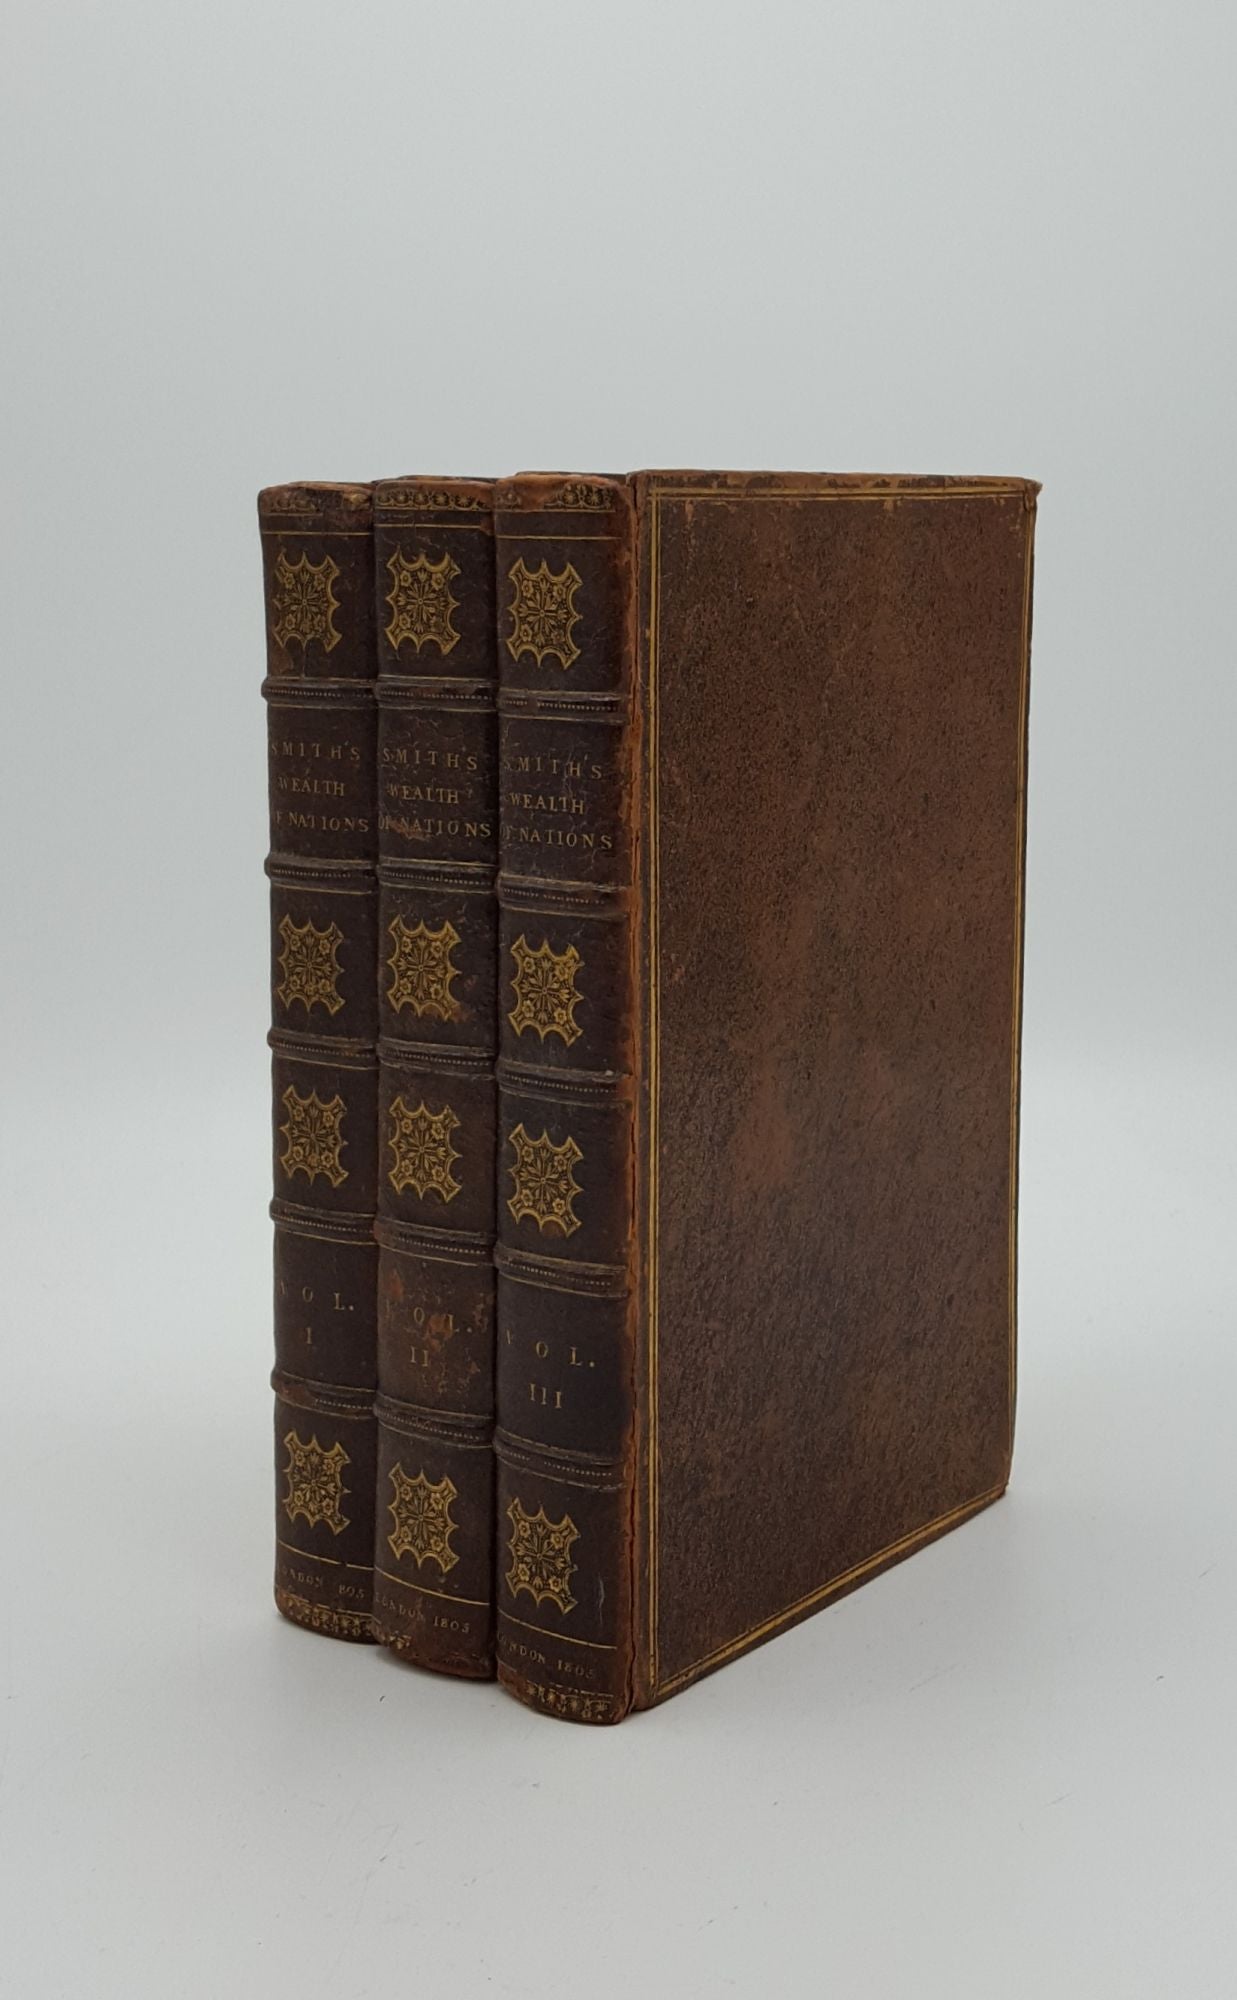 SMITH Adam - An Inquiry Into the Nature and Causes of the Wealth of Nations the Eleventh Edition with Notes Supplementary Chapters and a Life of Dr Smith by William Playfair in Three Volumes